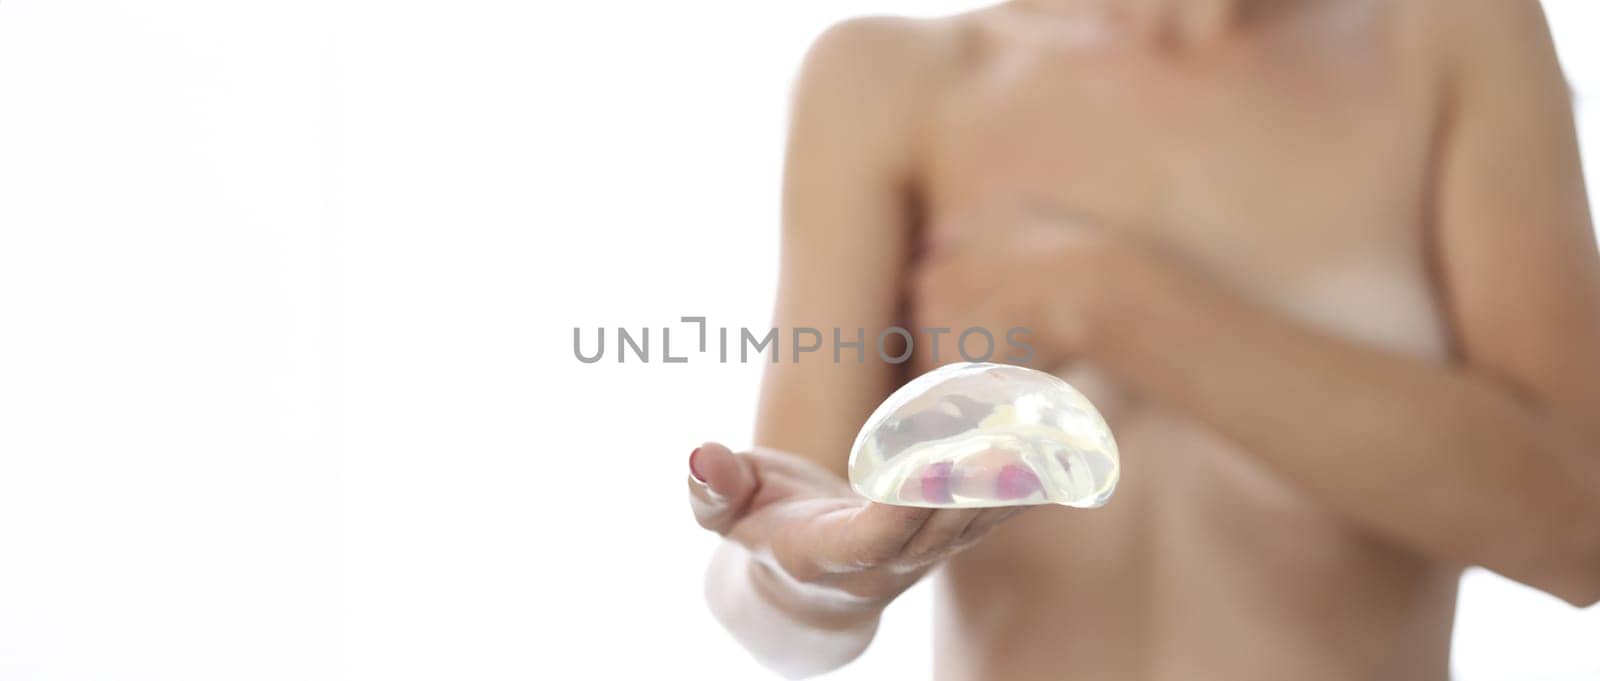 Woman holds silicone breast implant for breast augmentation. Plastic surgery concept